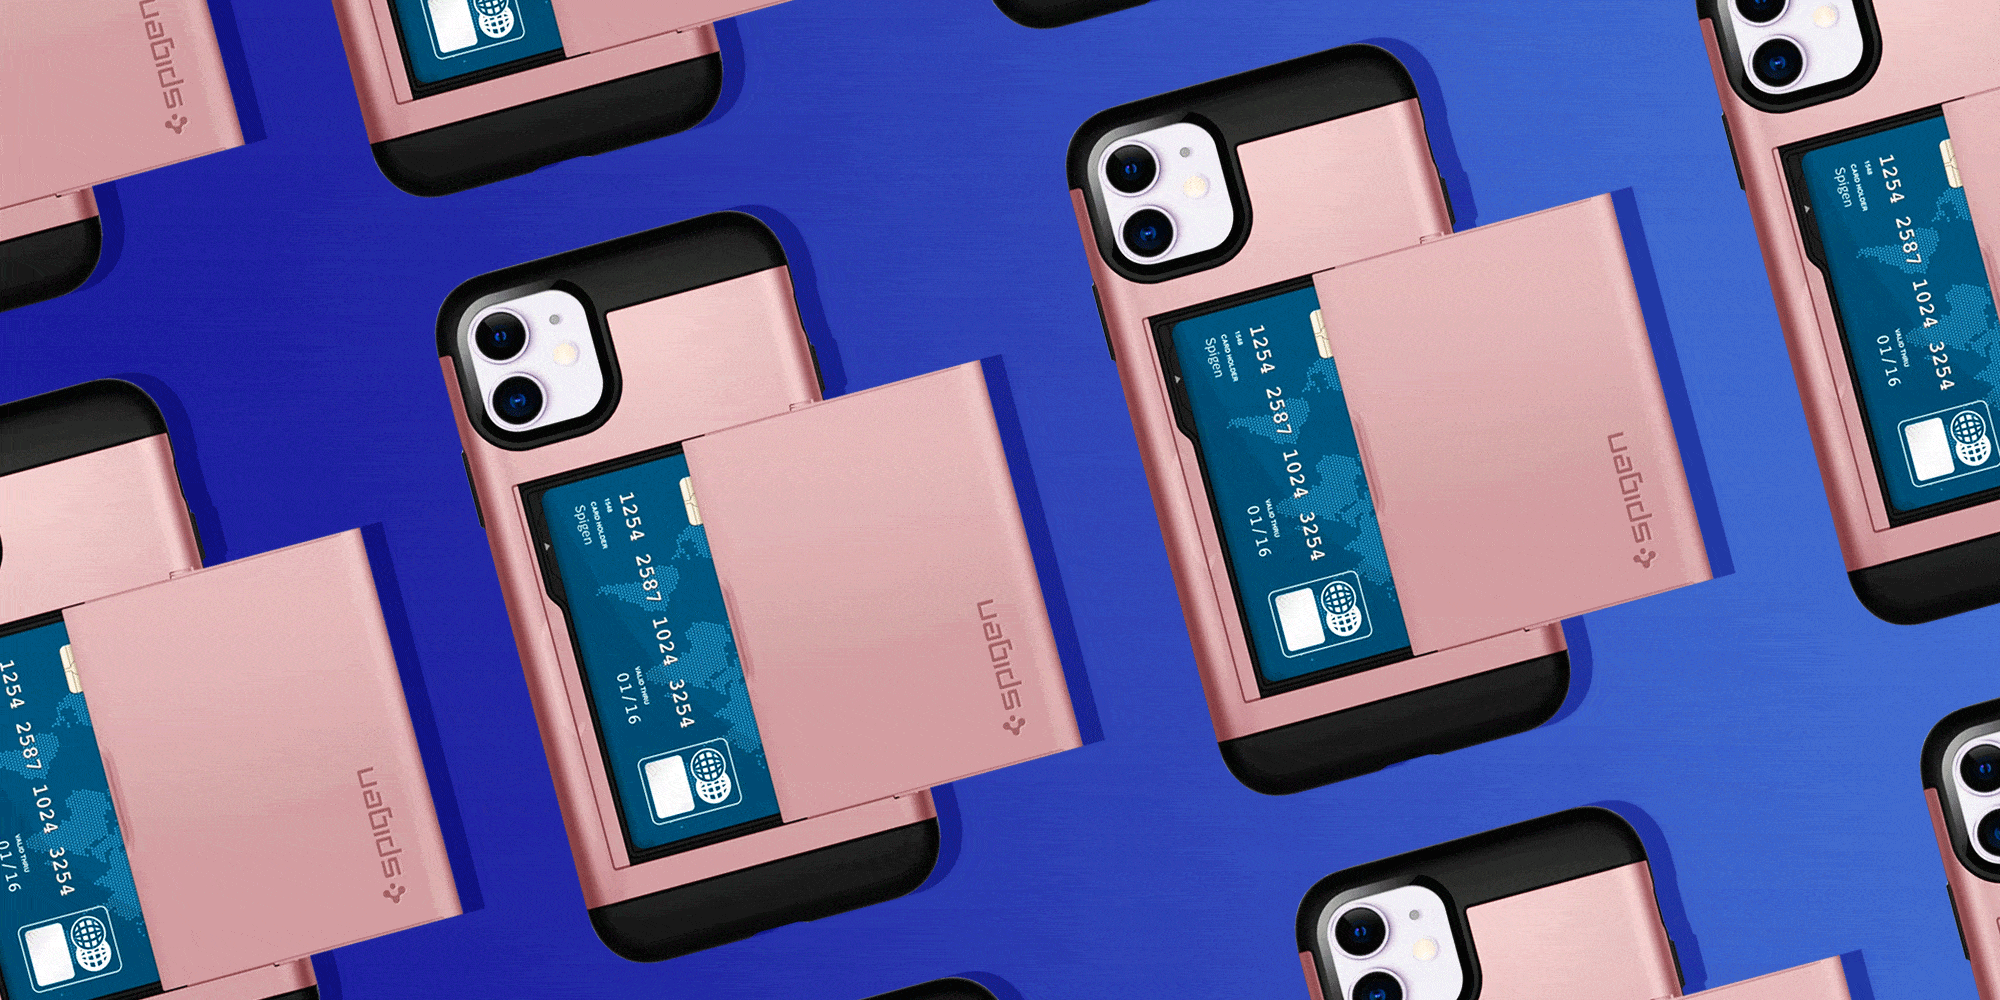 phone and credit card case